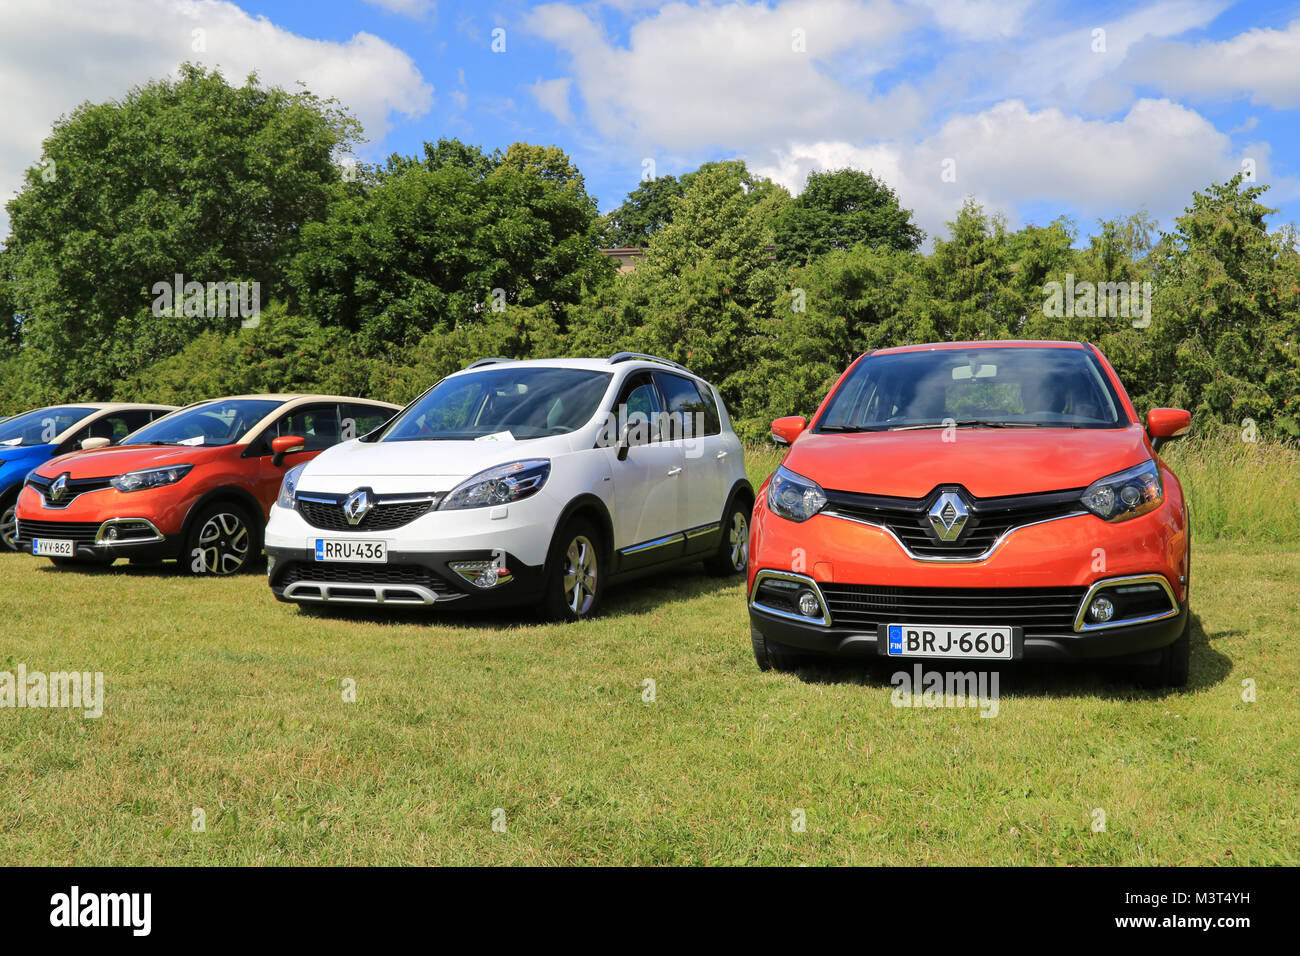 PIIKKIO, FINLAND - JULY 19, 2014: Red Renault Captur Cars and a White Scenic Xmod on display. Renault Captur wins its category in the influential Tow  Stock Photo